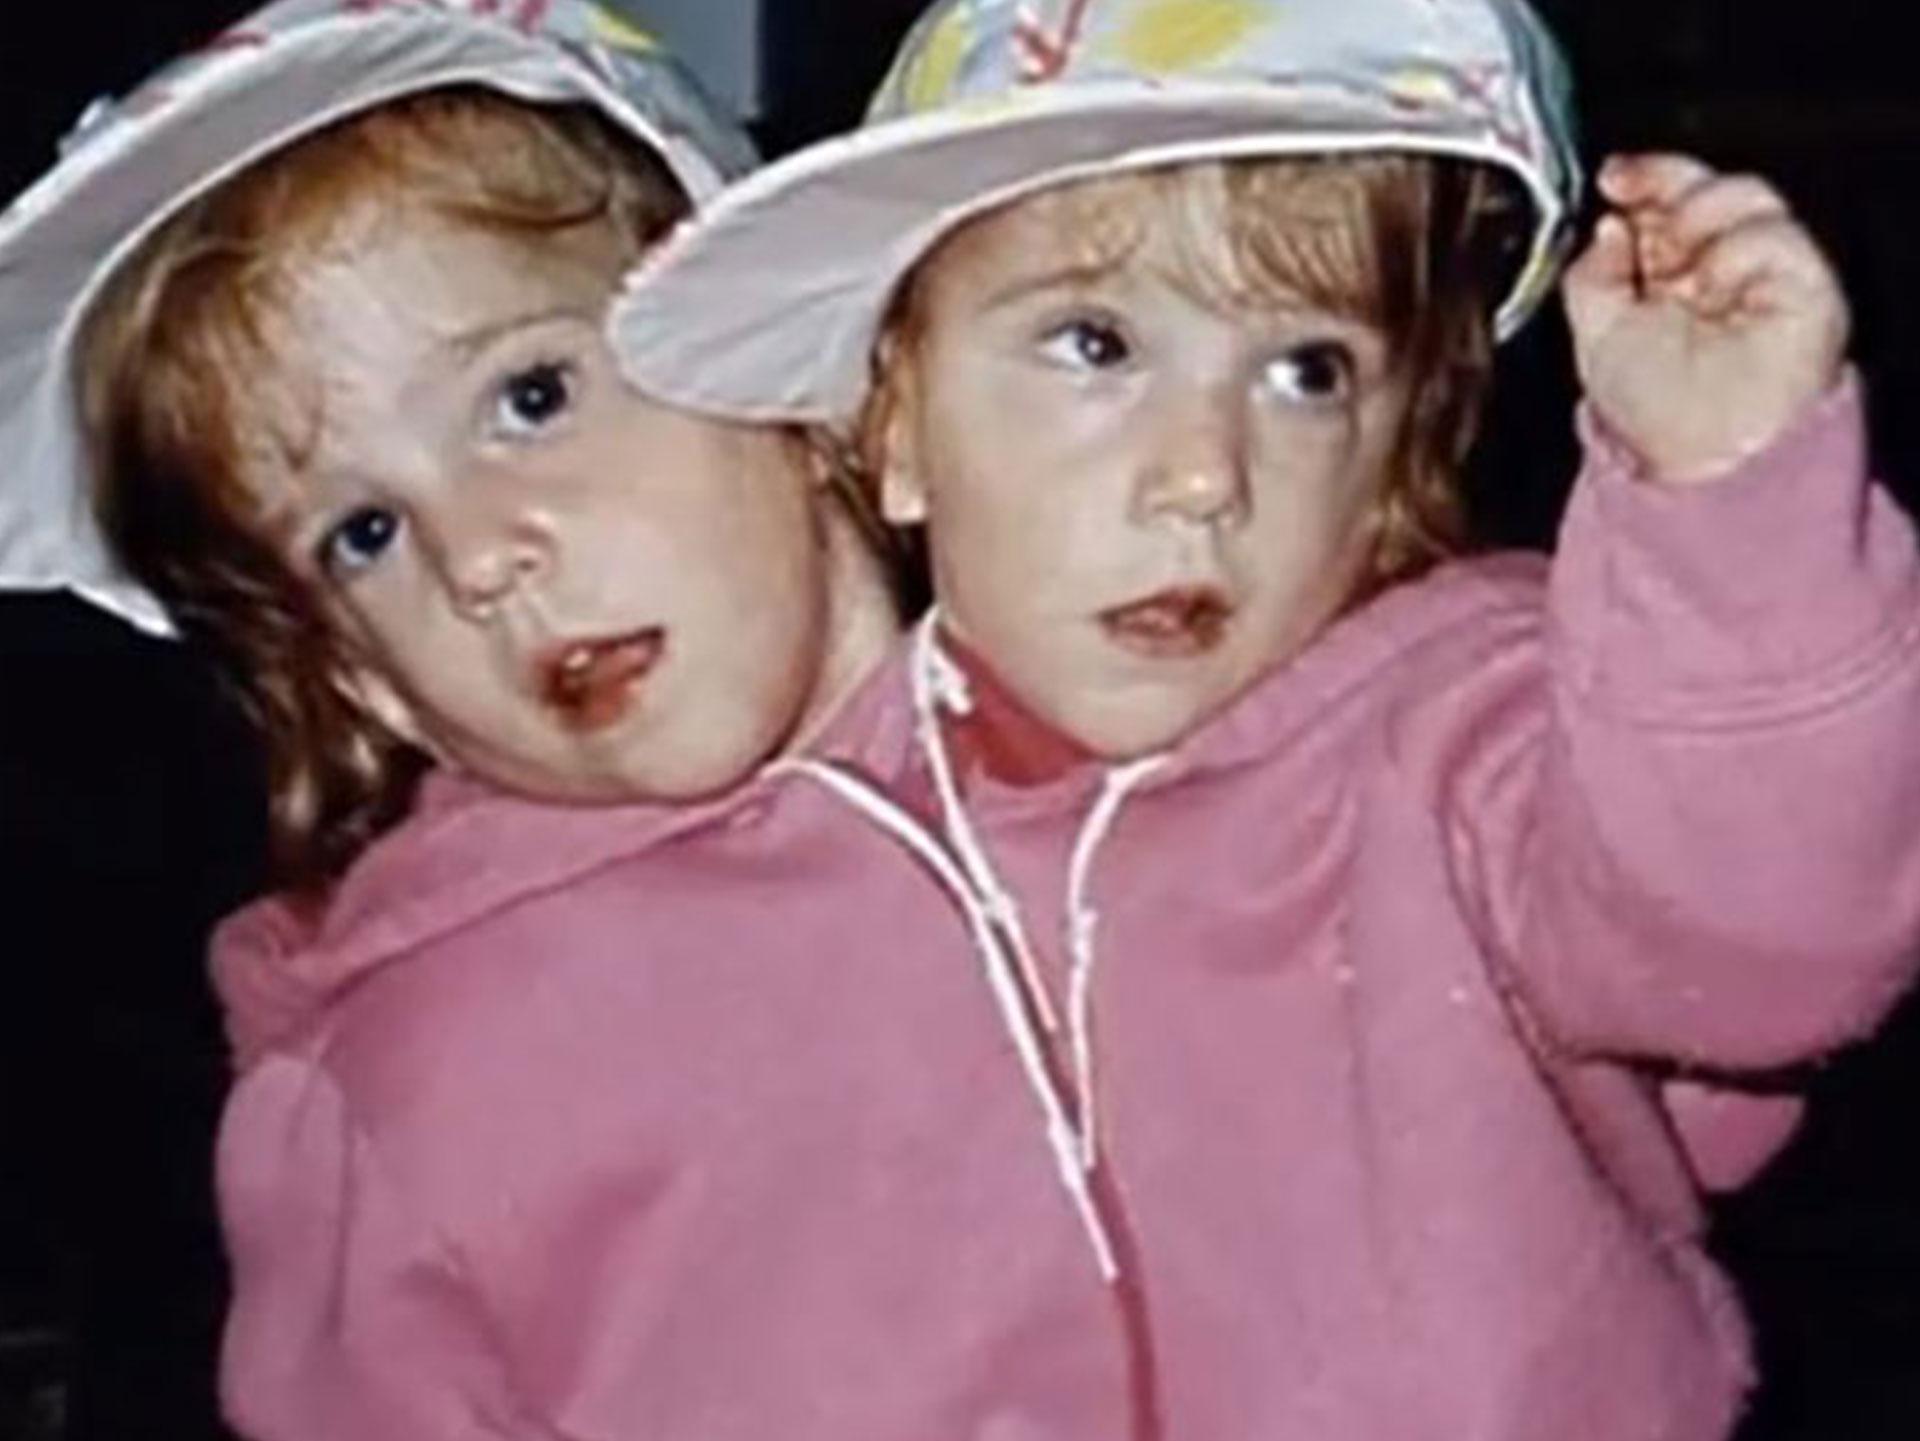 Conjoined twins Abby and Brittany Hensel: where are they now?